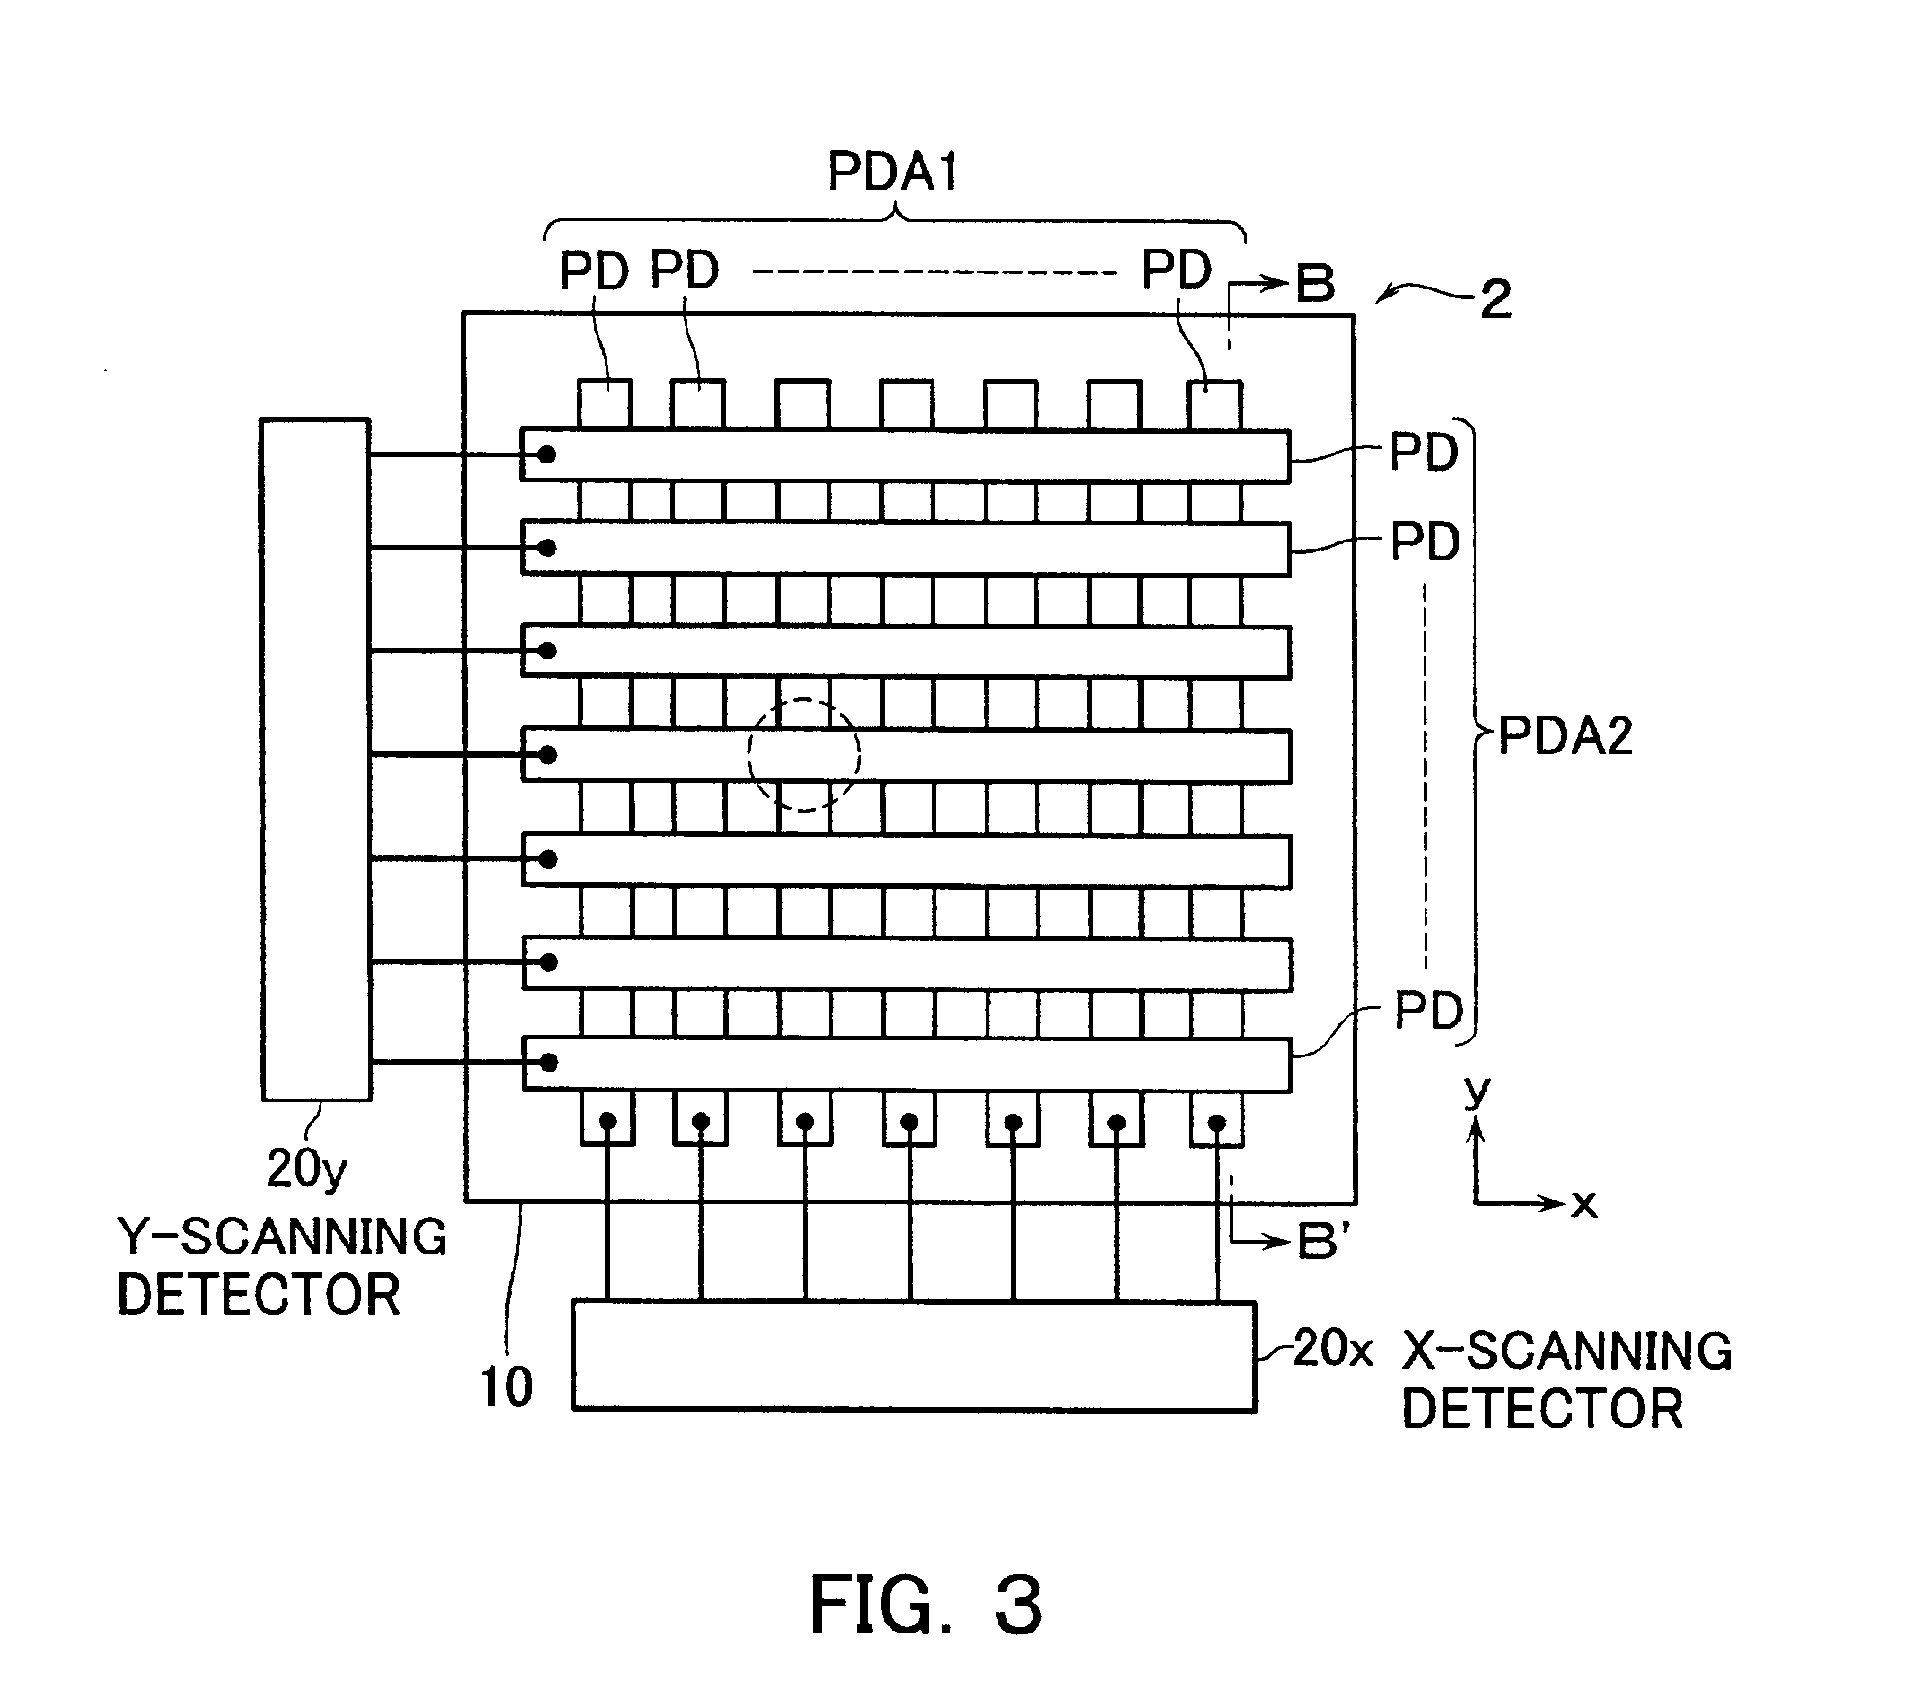 Light spot position sensor and displacement measuring device